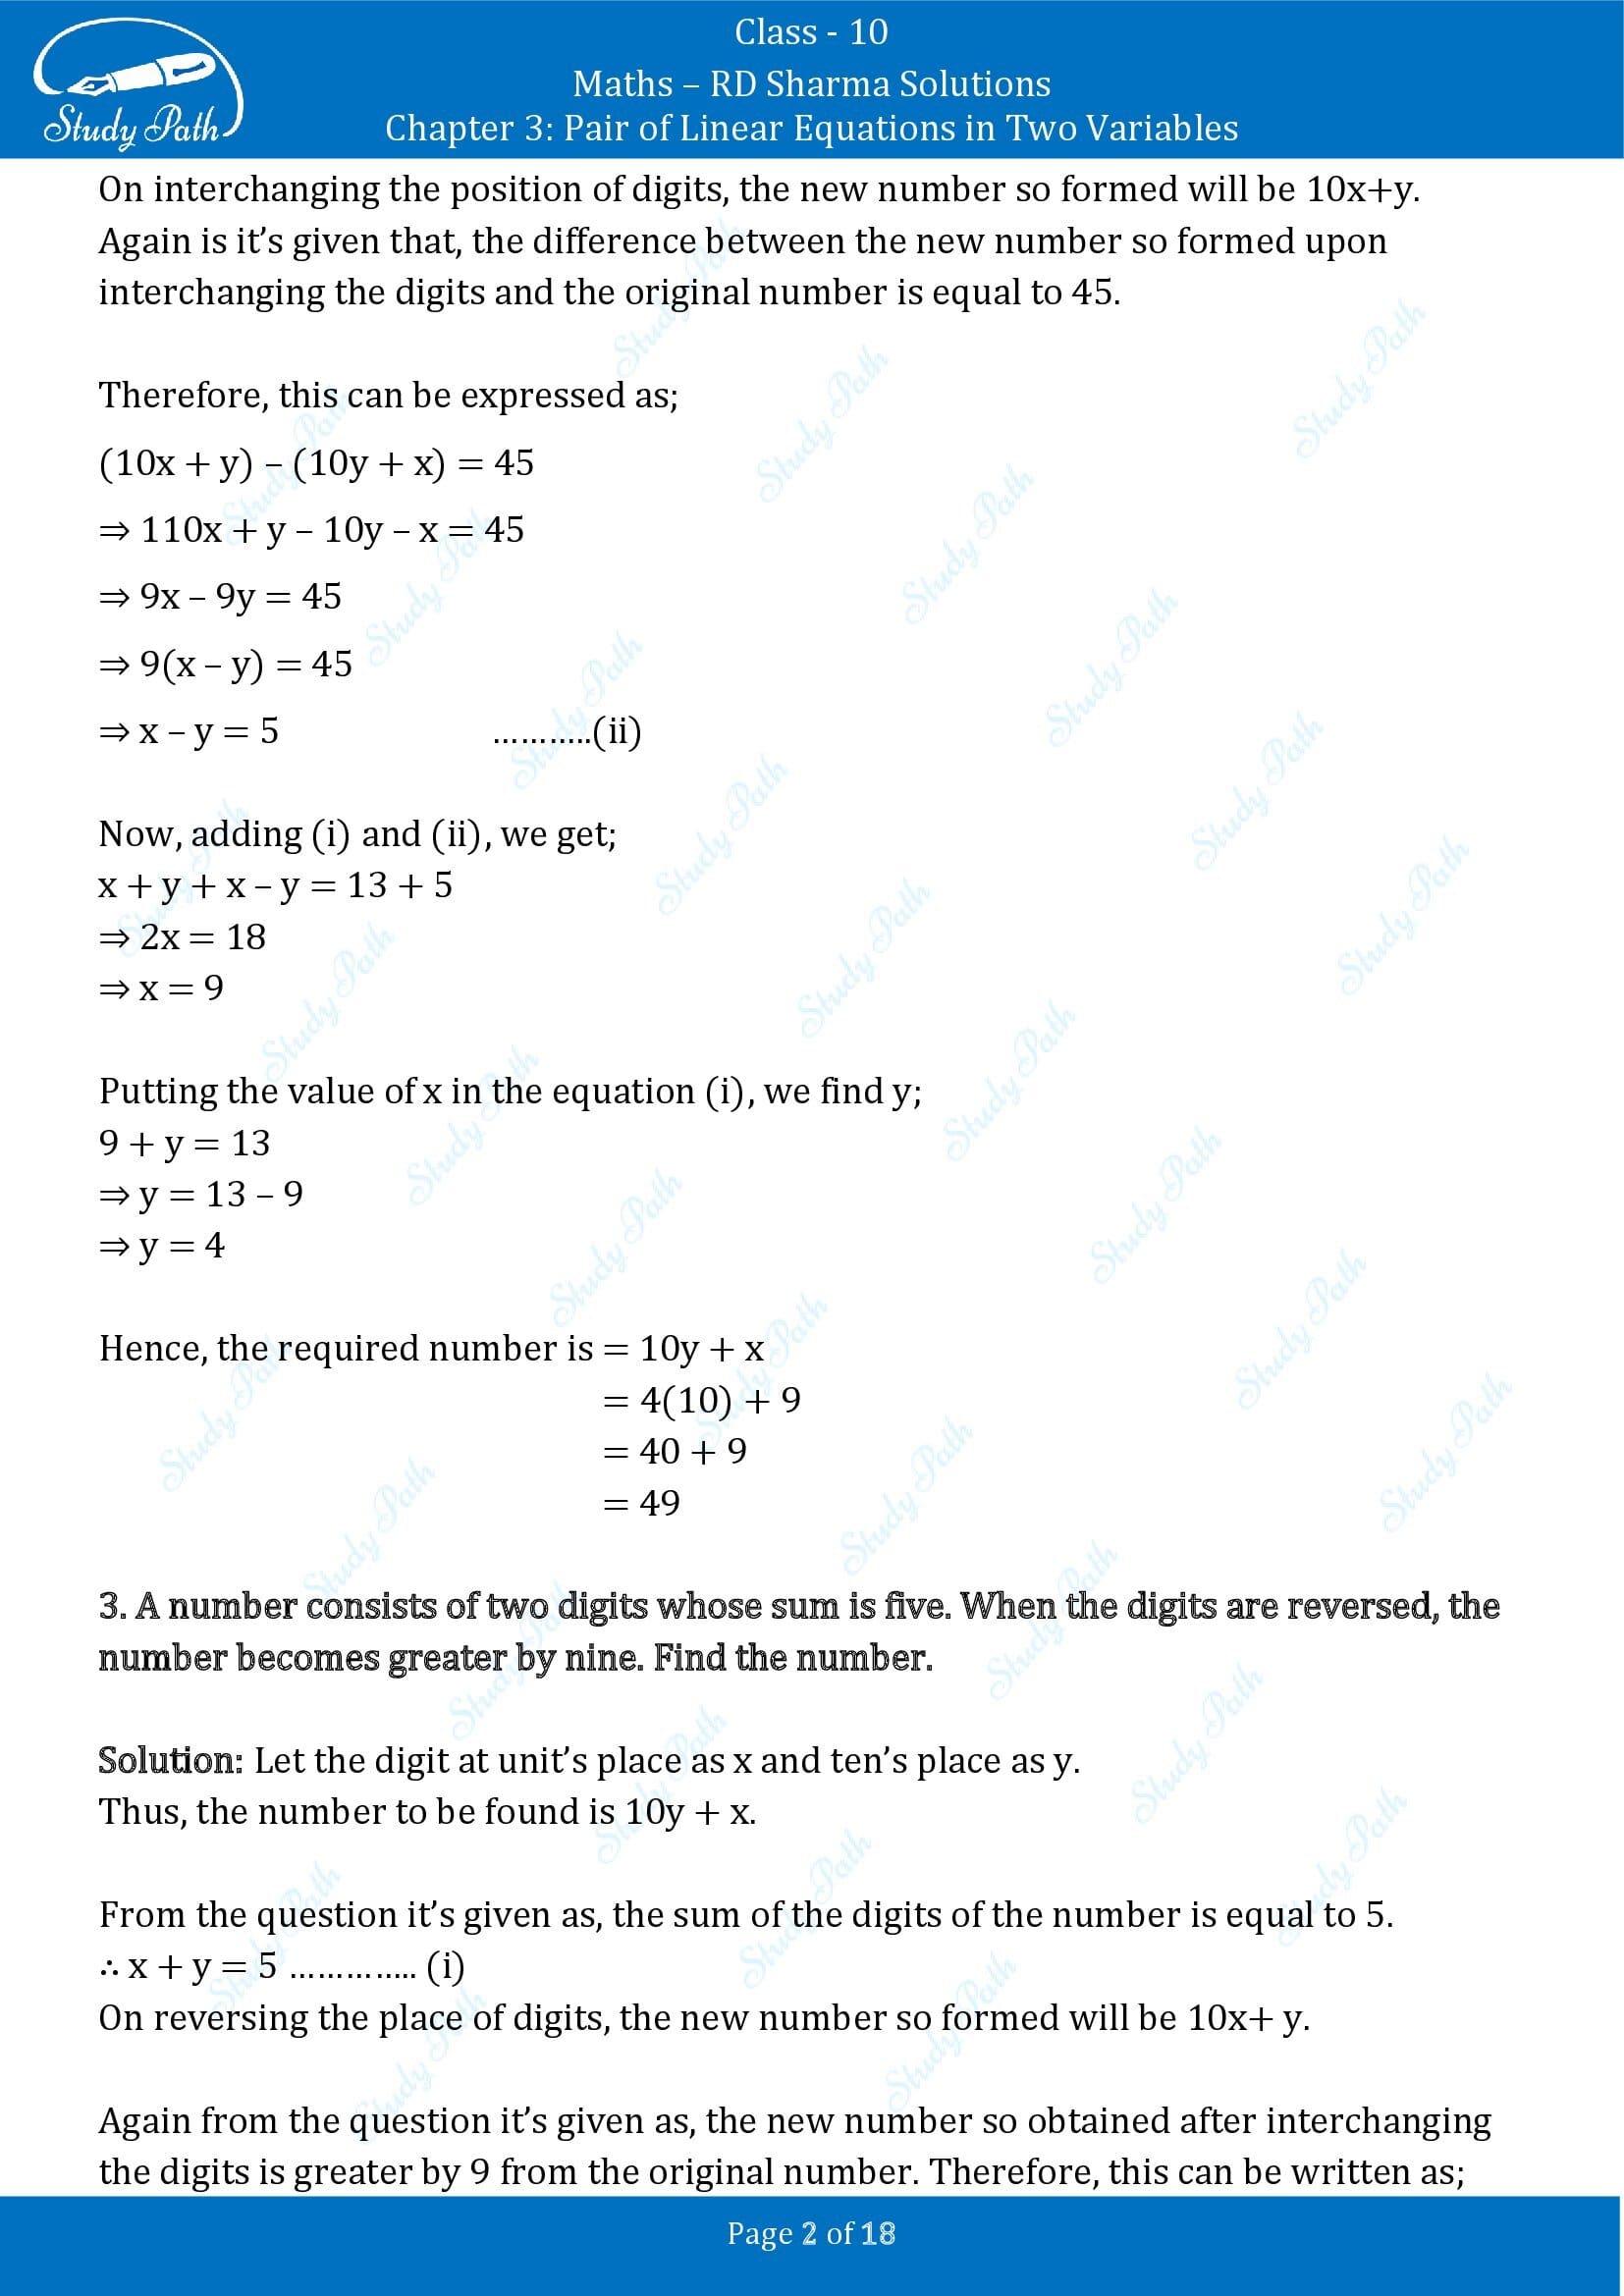 RD Sharma Solutions Class 10 Chapter 3 Pair of Linear Equations in Two Variables Exercise 3.7 00002